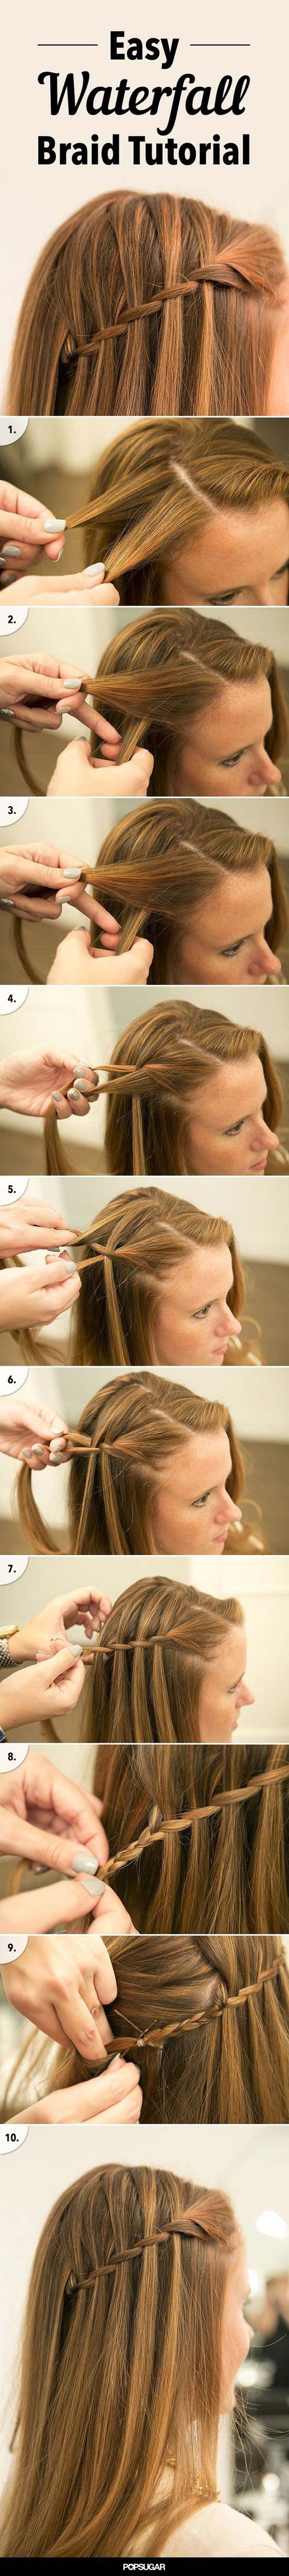 Best Hairstyles for Long Hair - Waterfall Braid Tutorial- Step by Step Tutorials for Easy Curls, Updo, Half Up, Braids and Lazy Girl Looks. Prom Ideas, Special Occasion Hair and Braiding Instructions for Teens, Teenagers and Adults, Women and Girls 